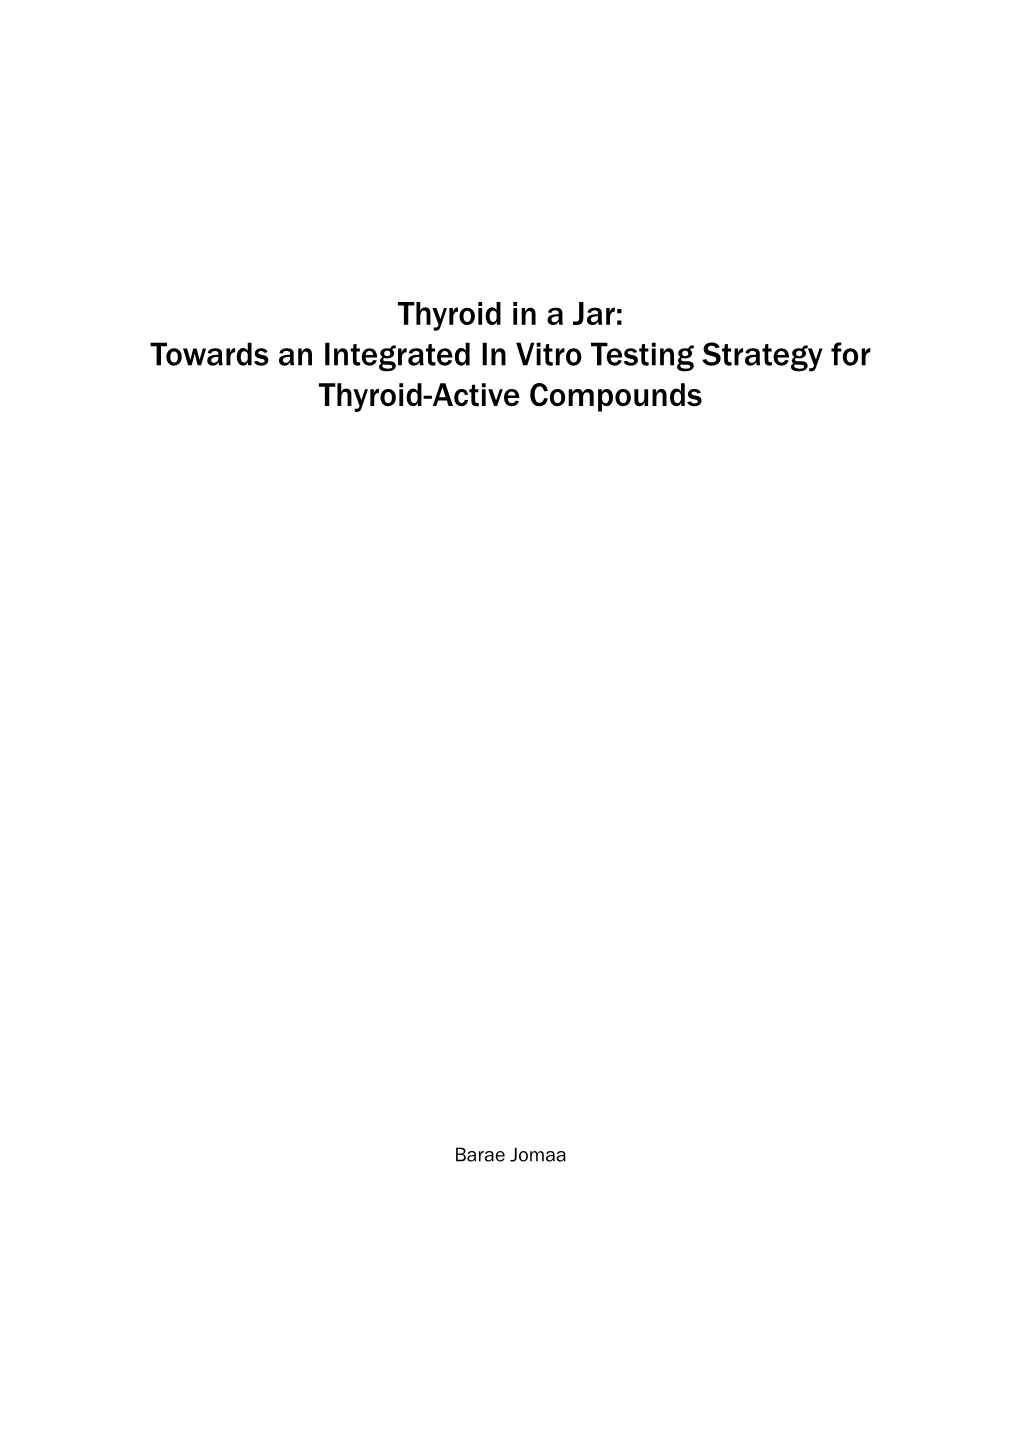 Thyroid in a Jar: Towards an Integrated in Vitro Testing Strategy for Thyroid-Active Compounds